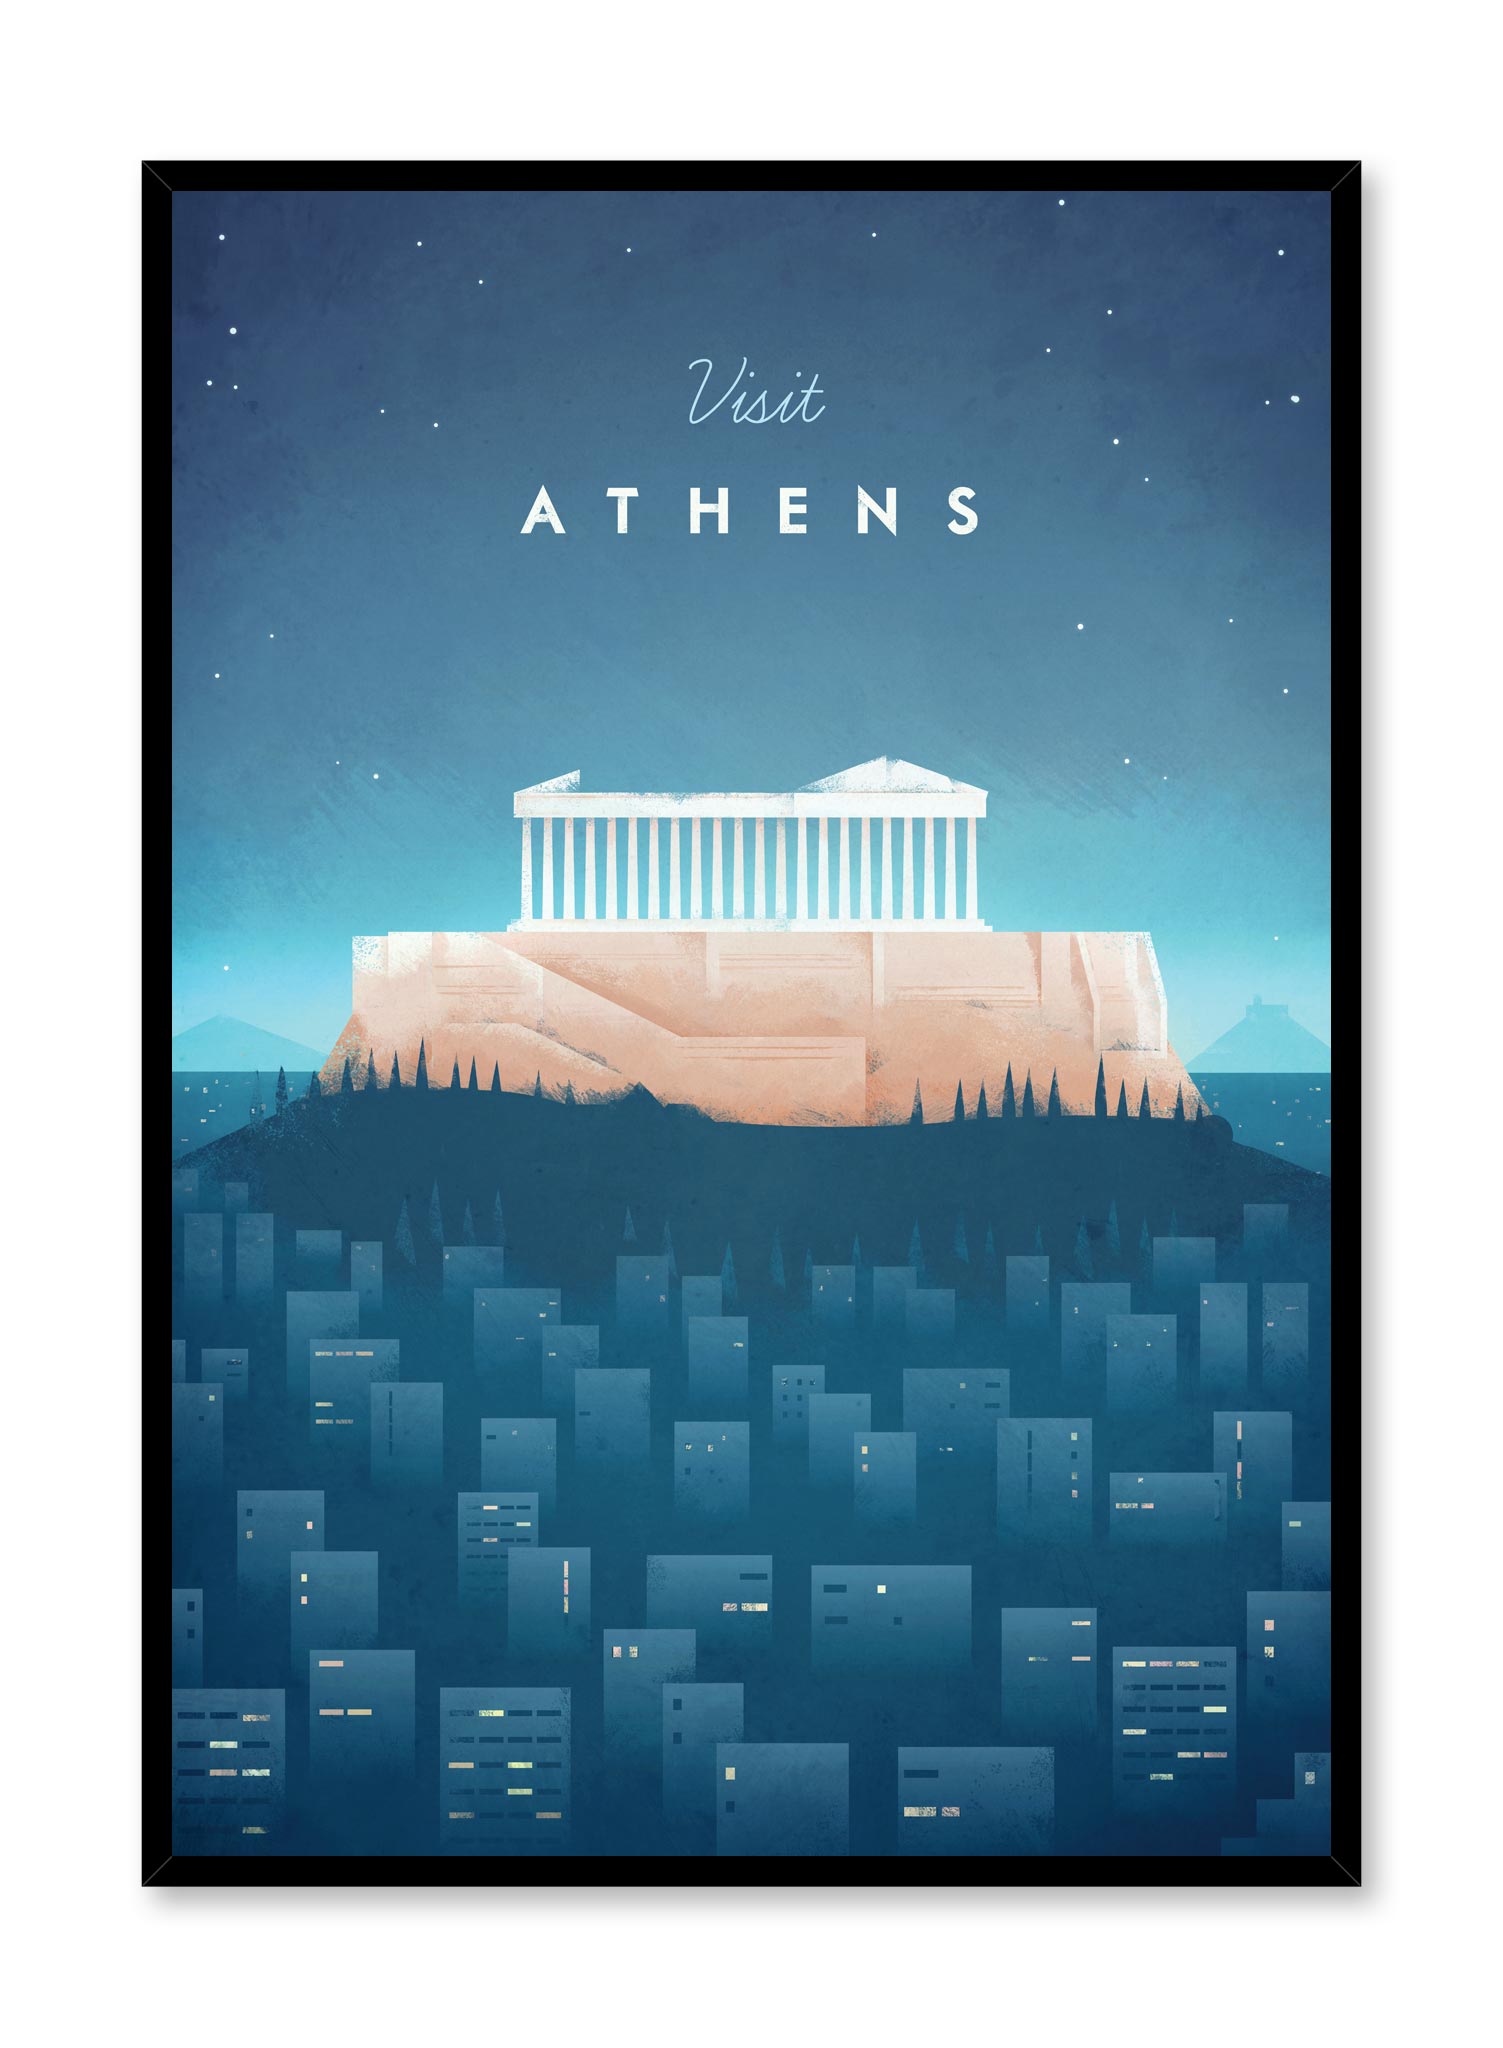 Modern minimalist travel poster by Opposite Wall with illustration of Athens